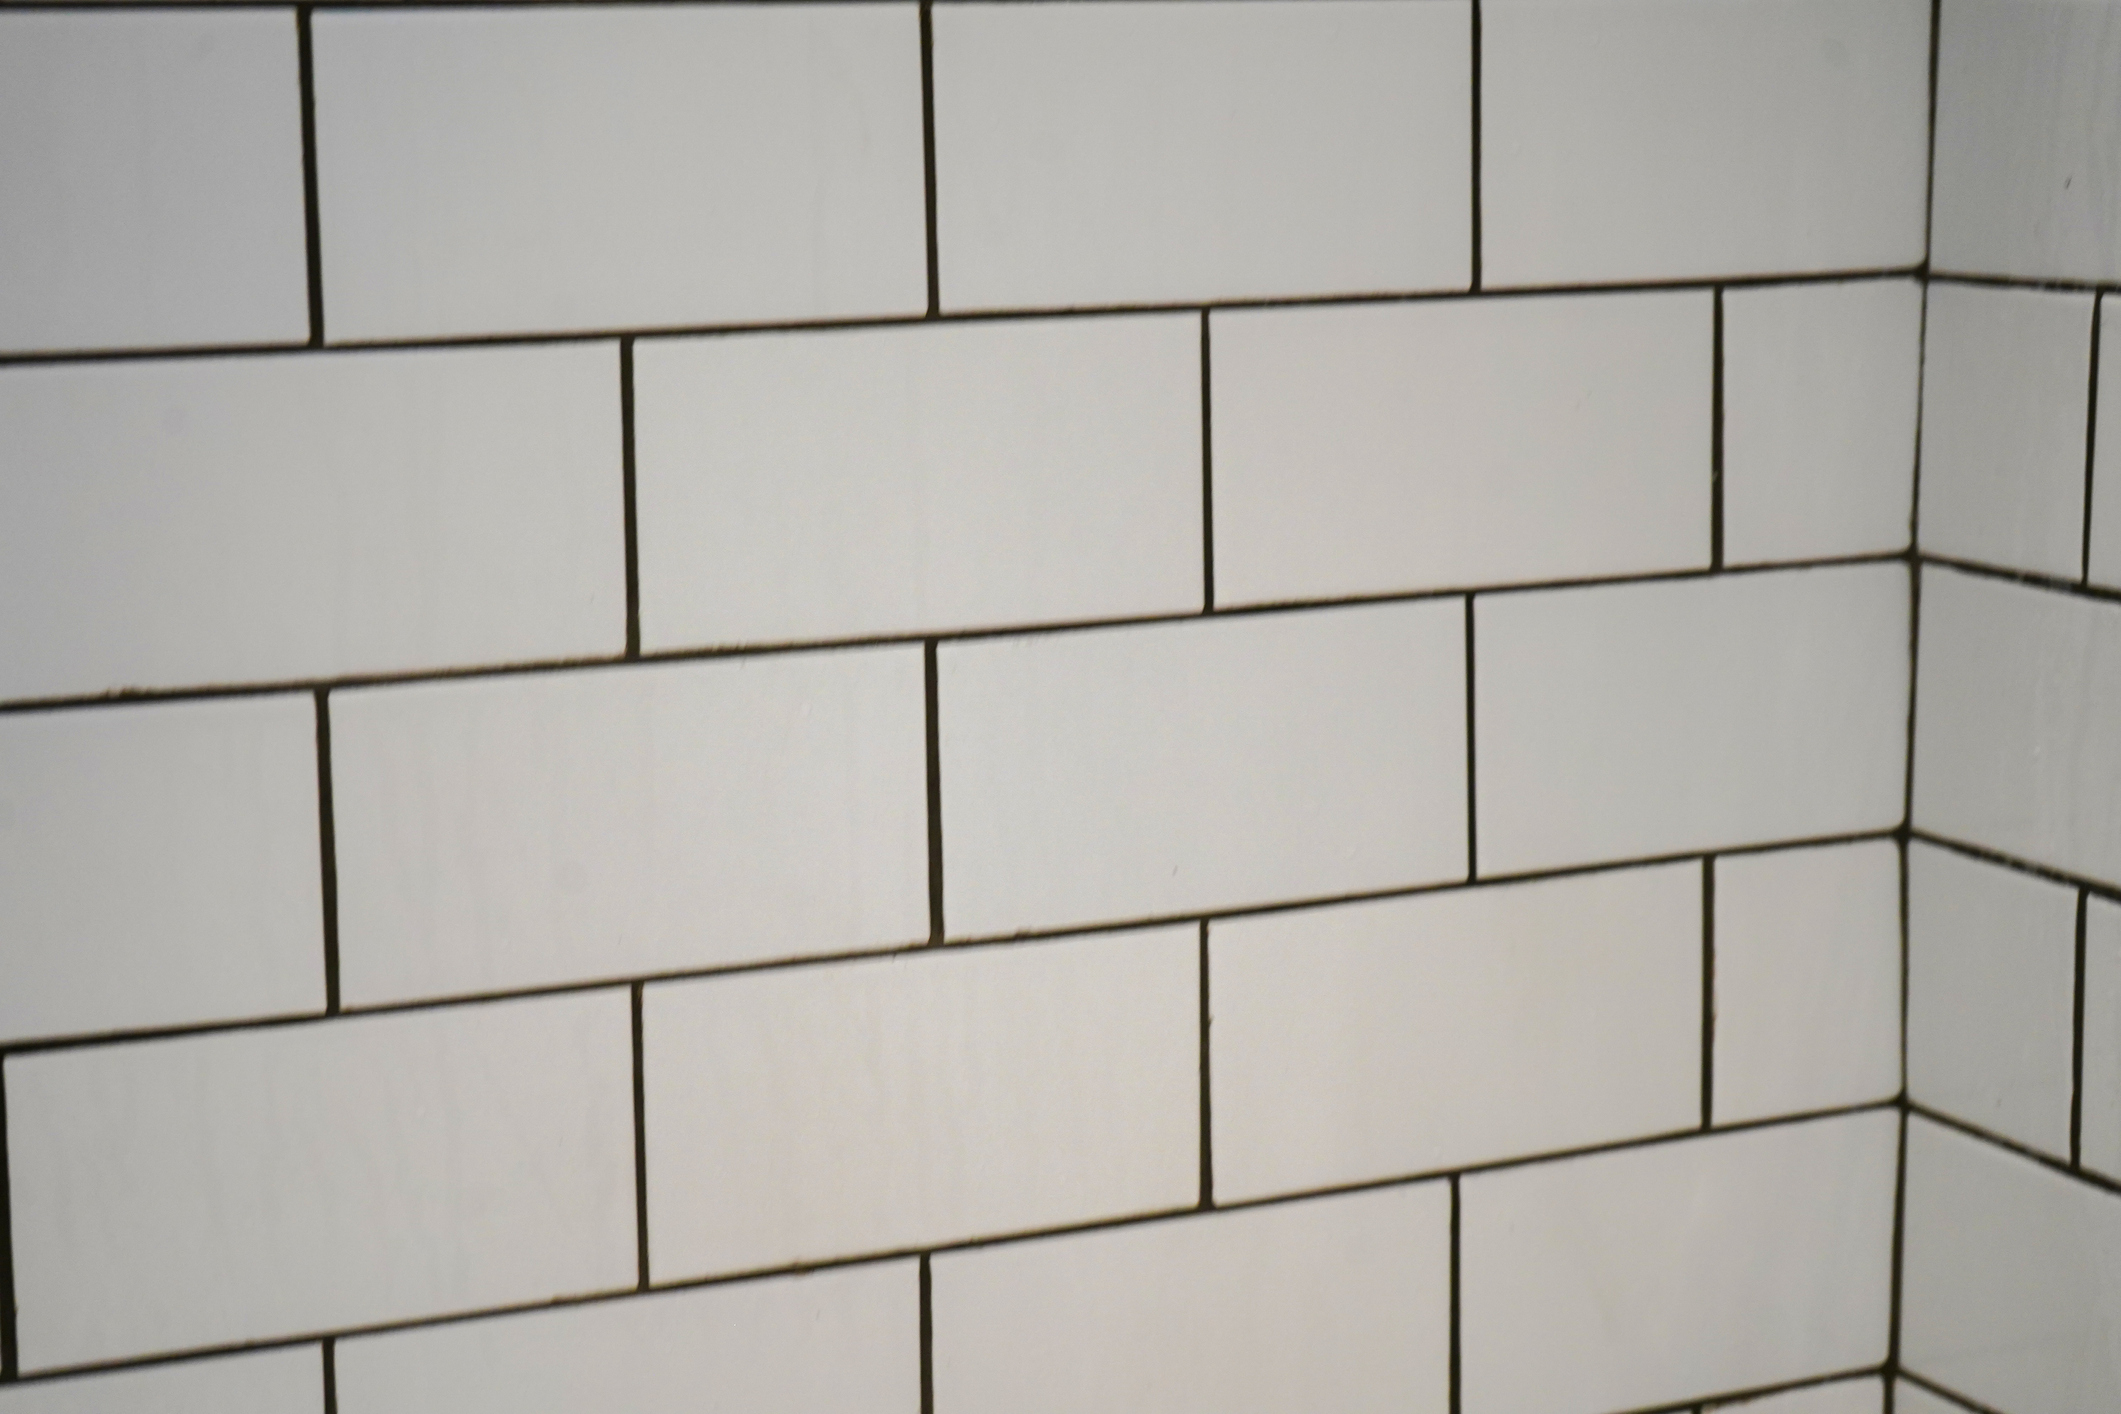 White subway tiles arranged in an offset pattern on a wall